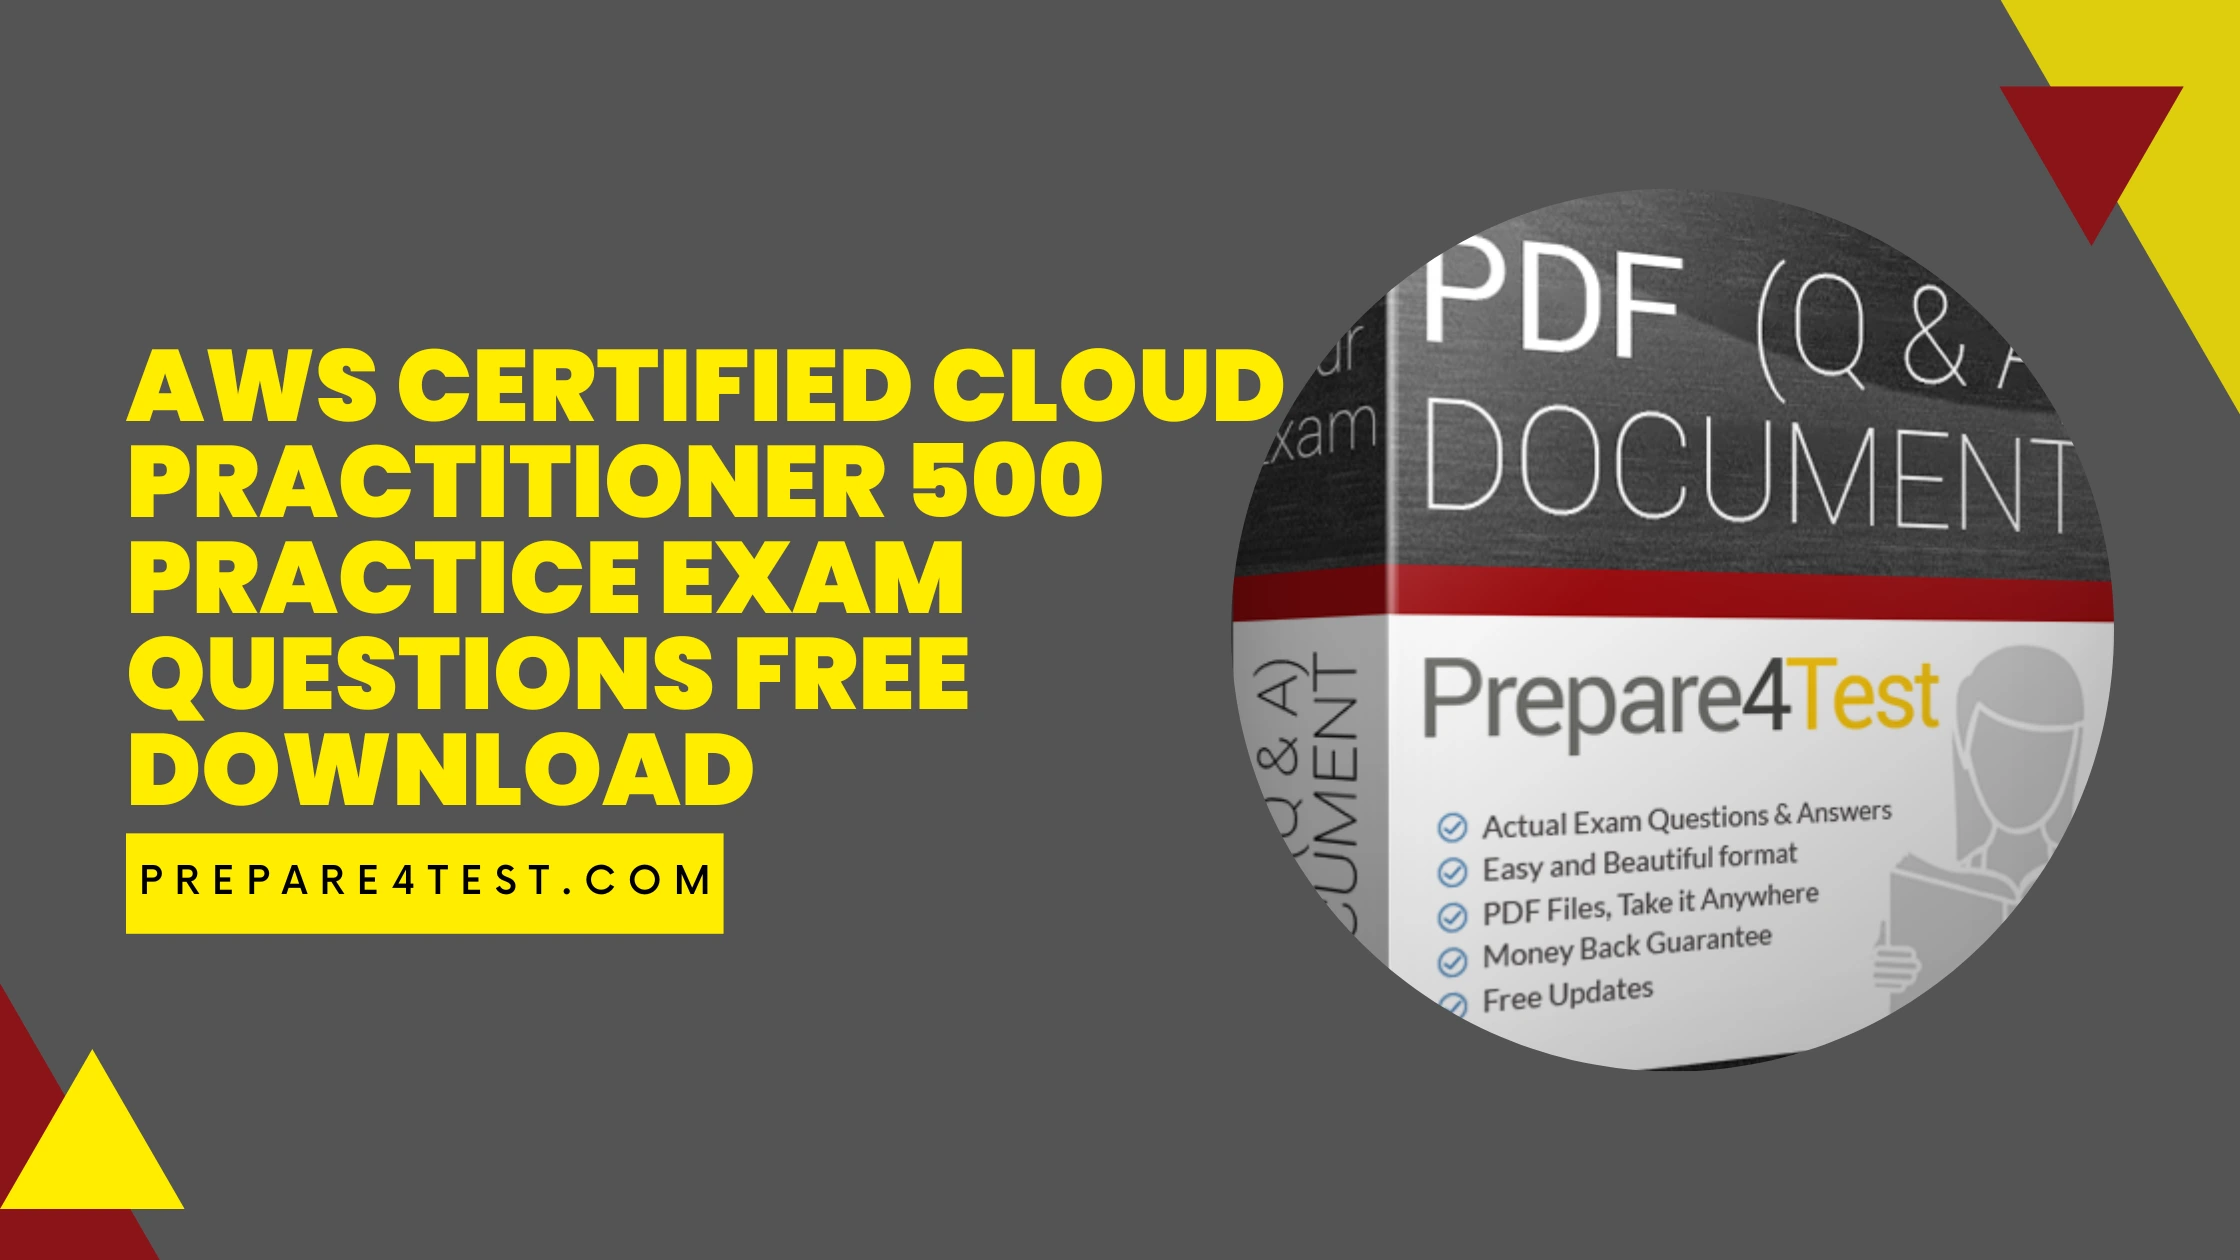 AWS Certified Cloud Practitioner 500 Practice Exam Questions Free Download